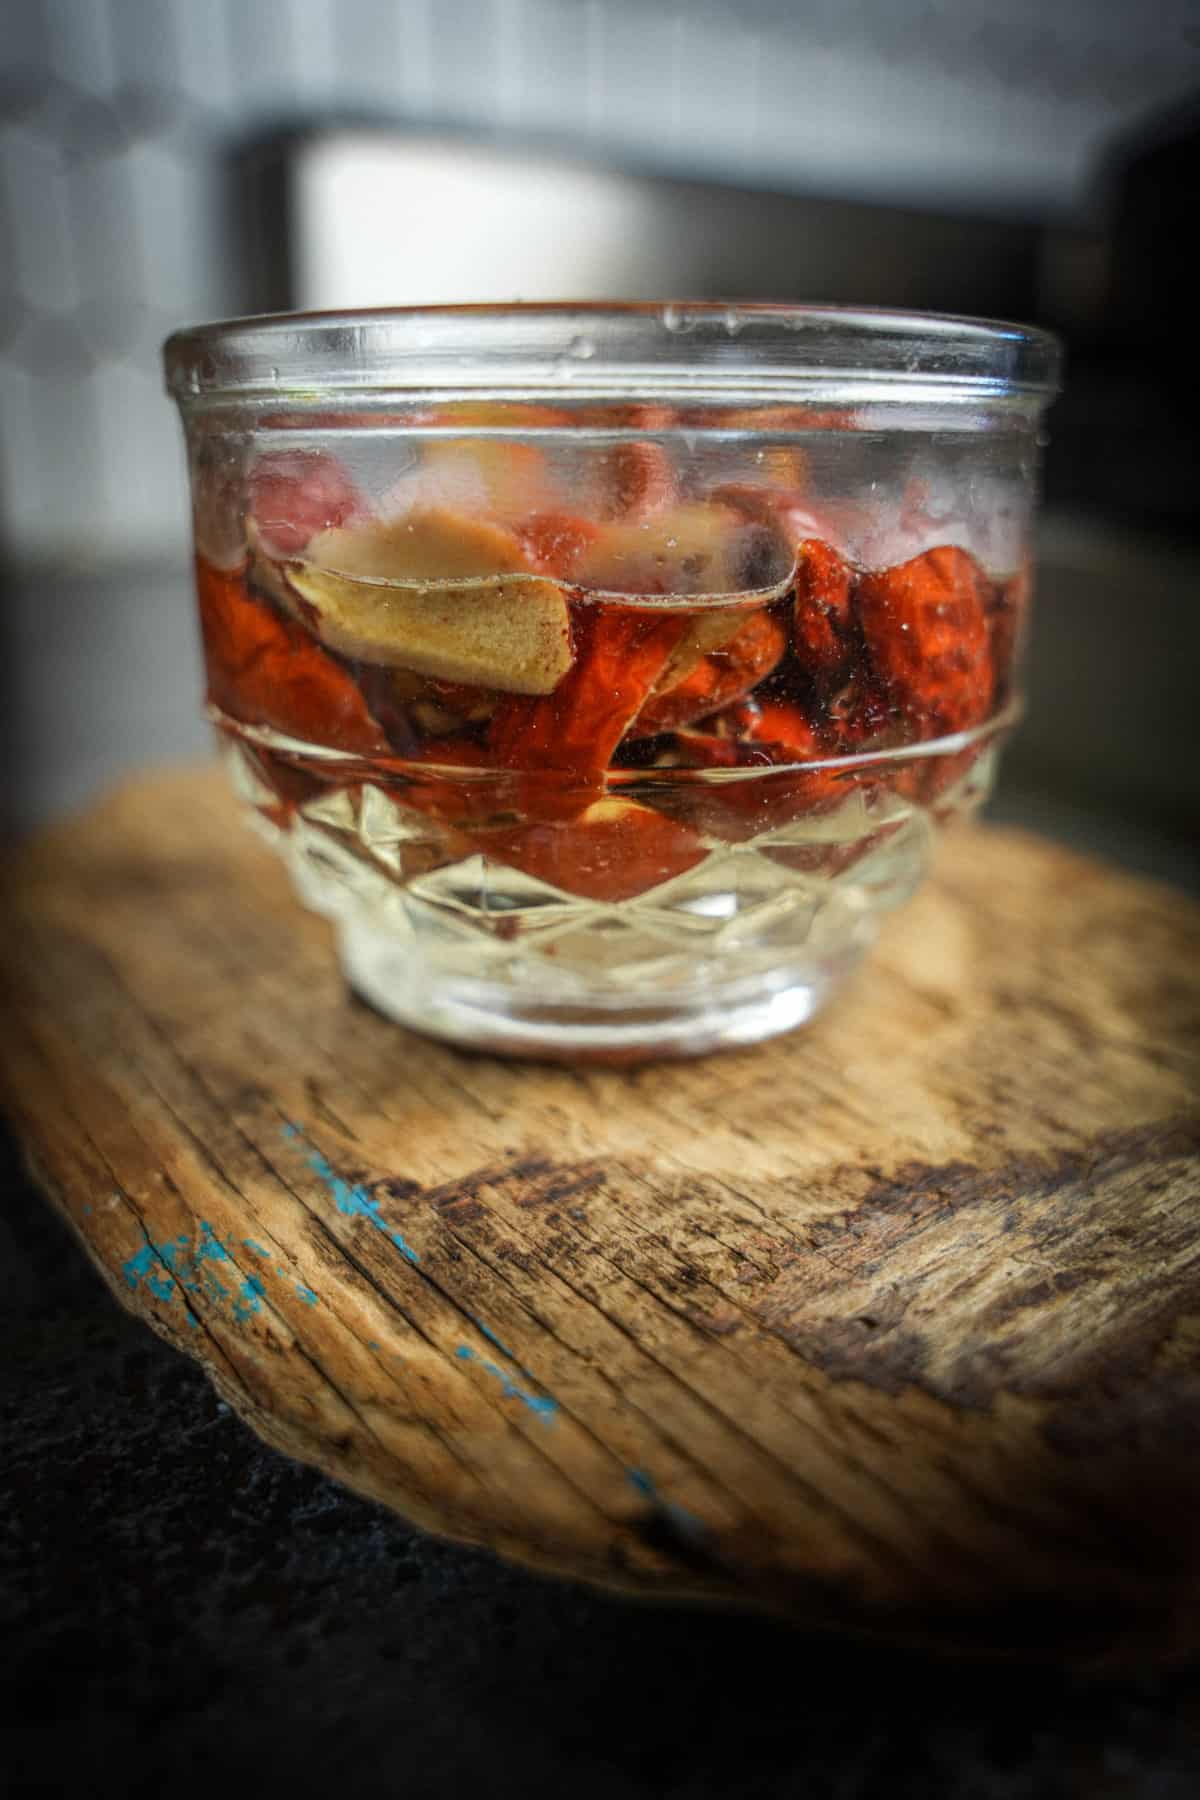 Red jujube dates soaking in a glass over a piece of wood.